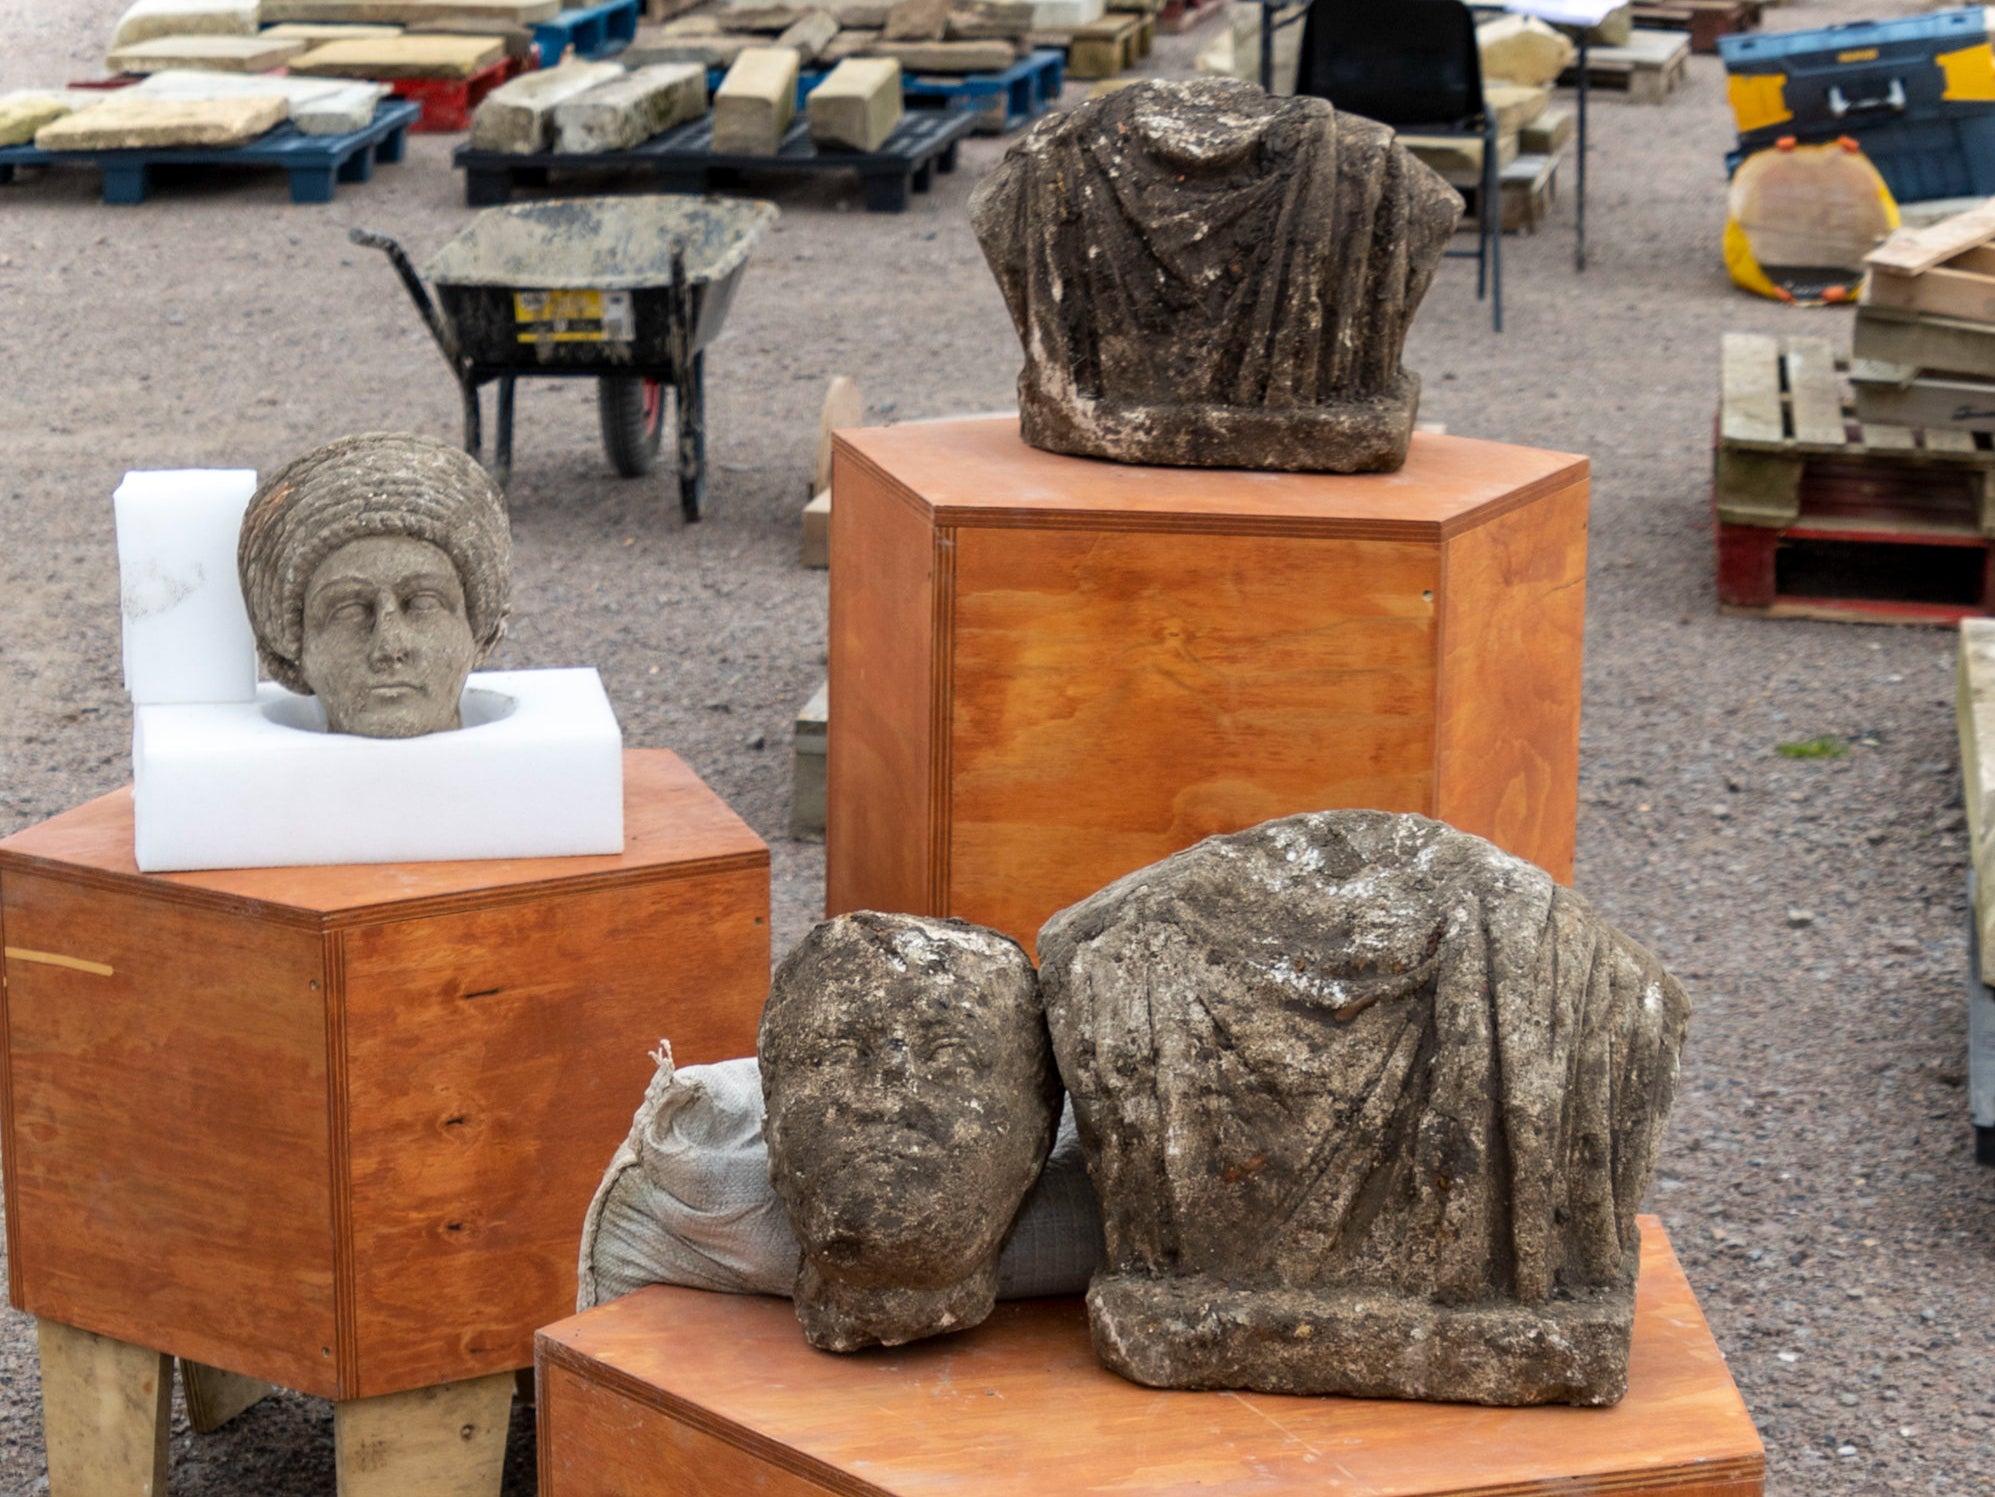 Three statues were uncovered at the site